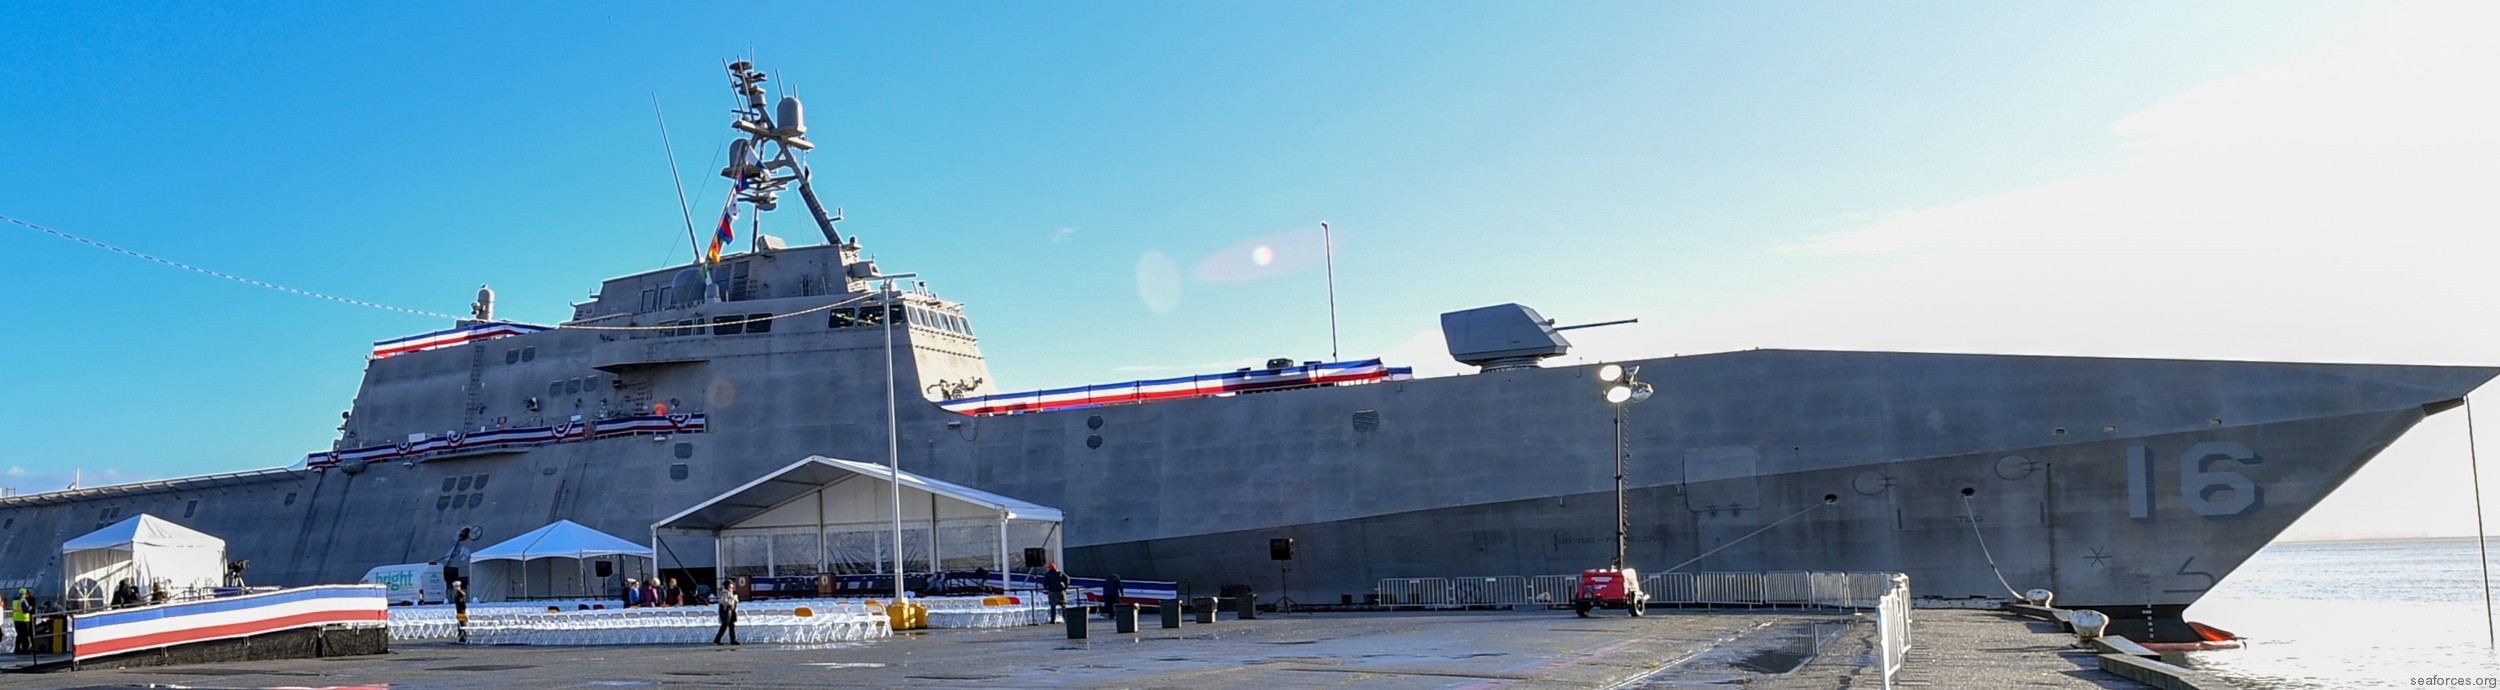 lcs-16 uss tulsa independence class littoral combat ship navy 08 commissioning ceremony